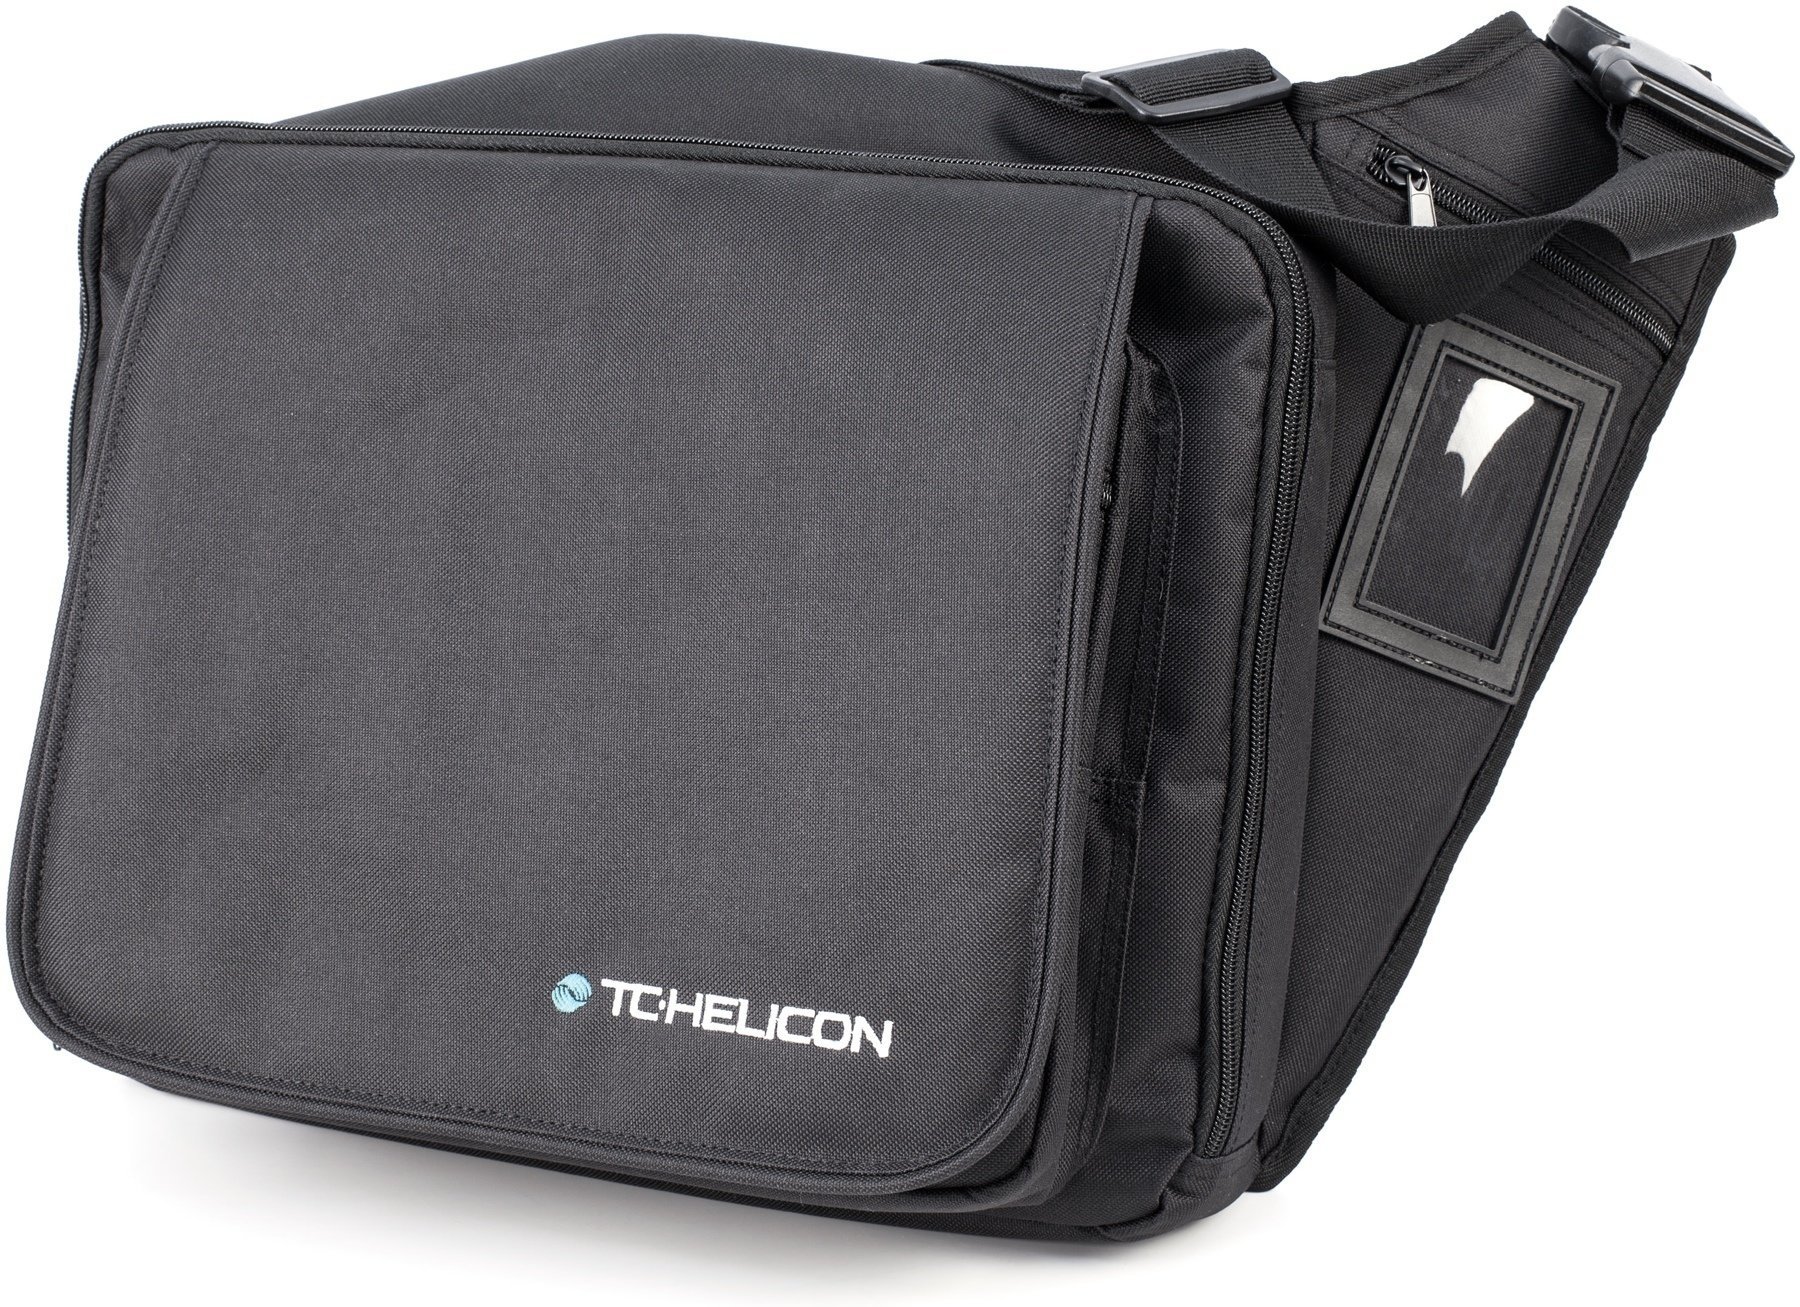 Photos - Guitar Case / Bag TC-Helicon TC Helicon TC Helicon VoiceLive 3 GB GIGBAG-VOICELIVE3 